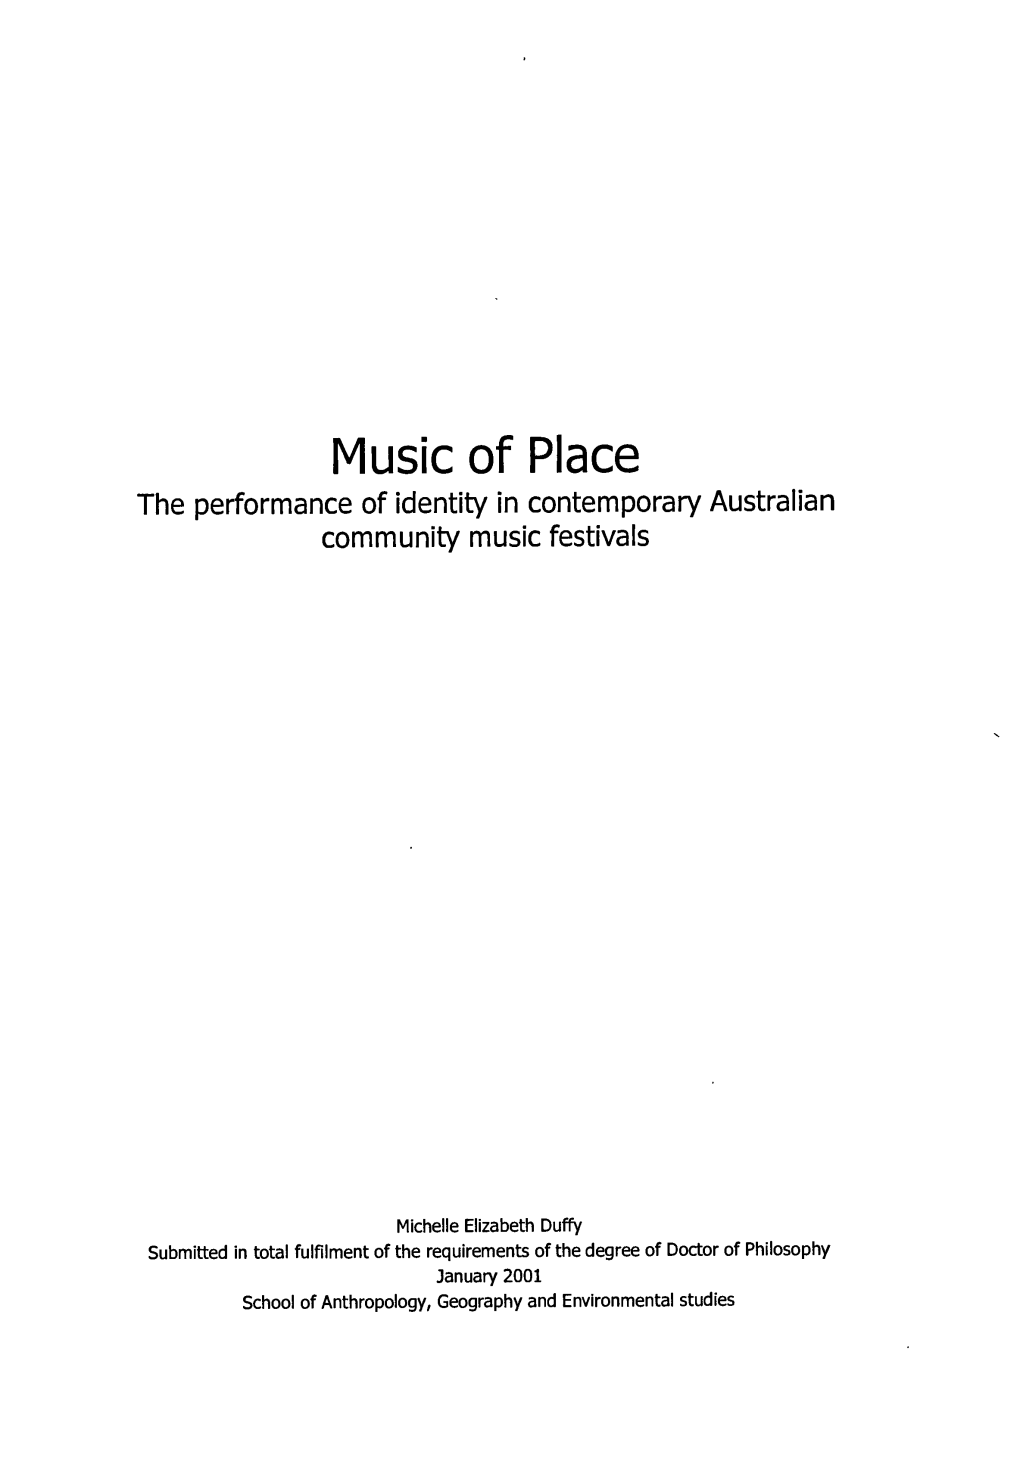 Music of Place : the Performance of Identity in Contemporary Australian